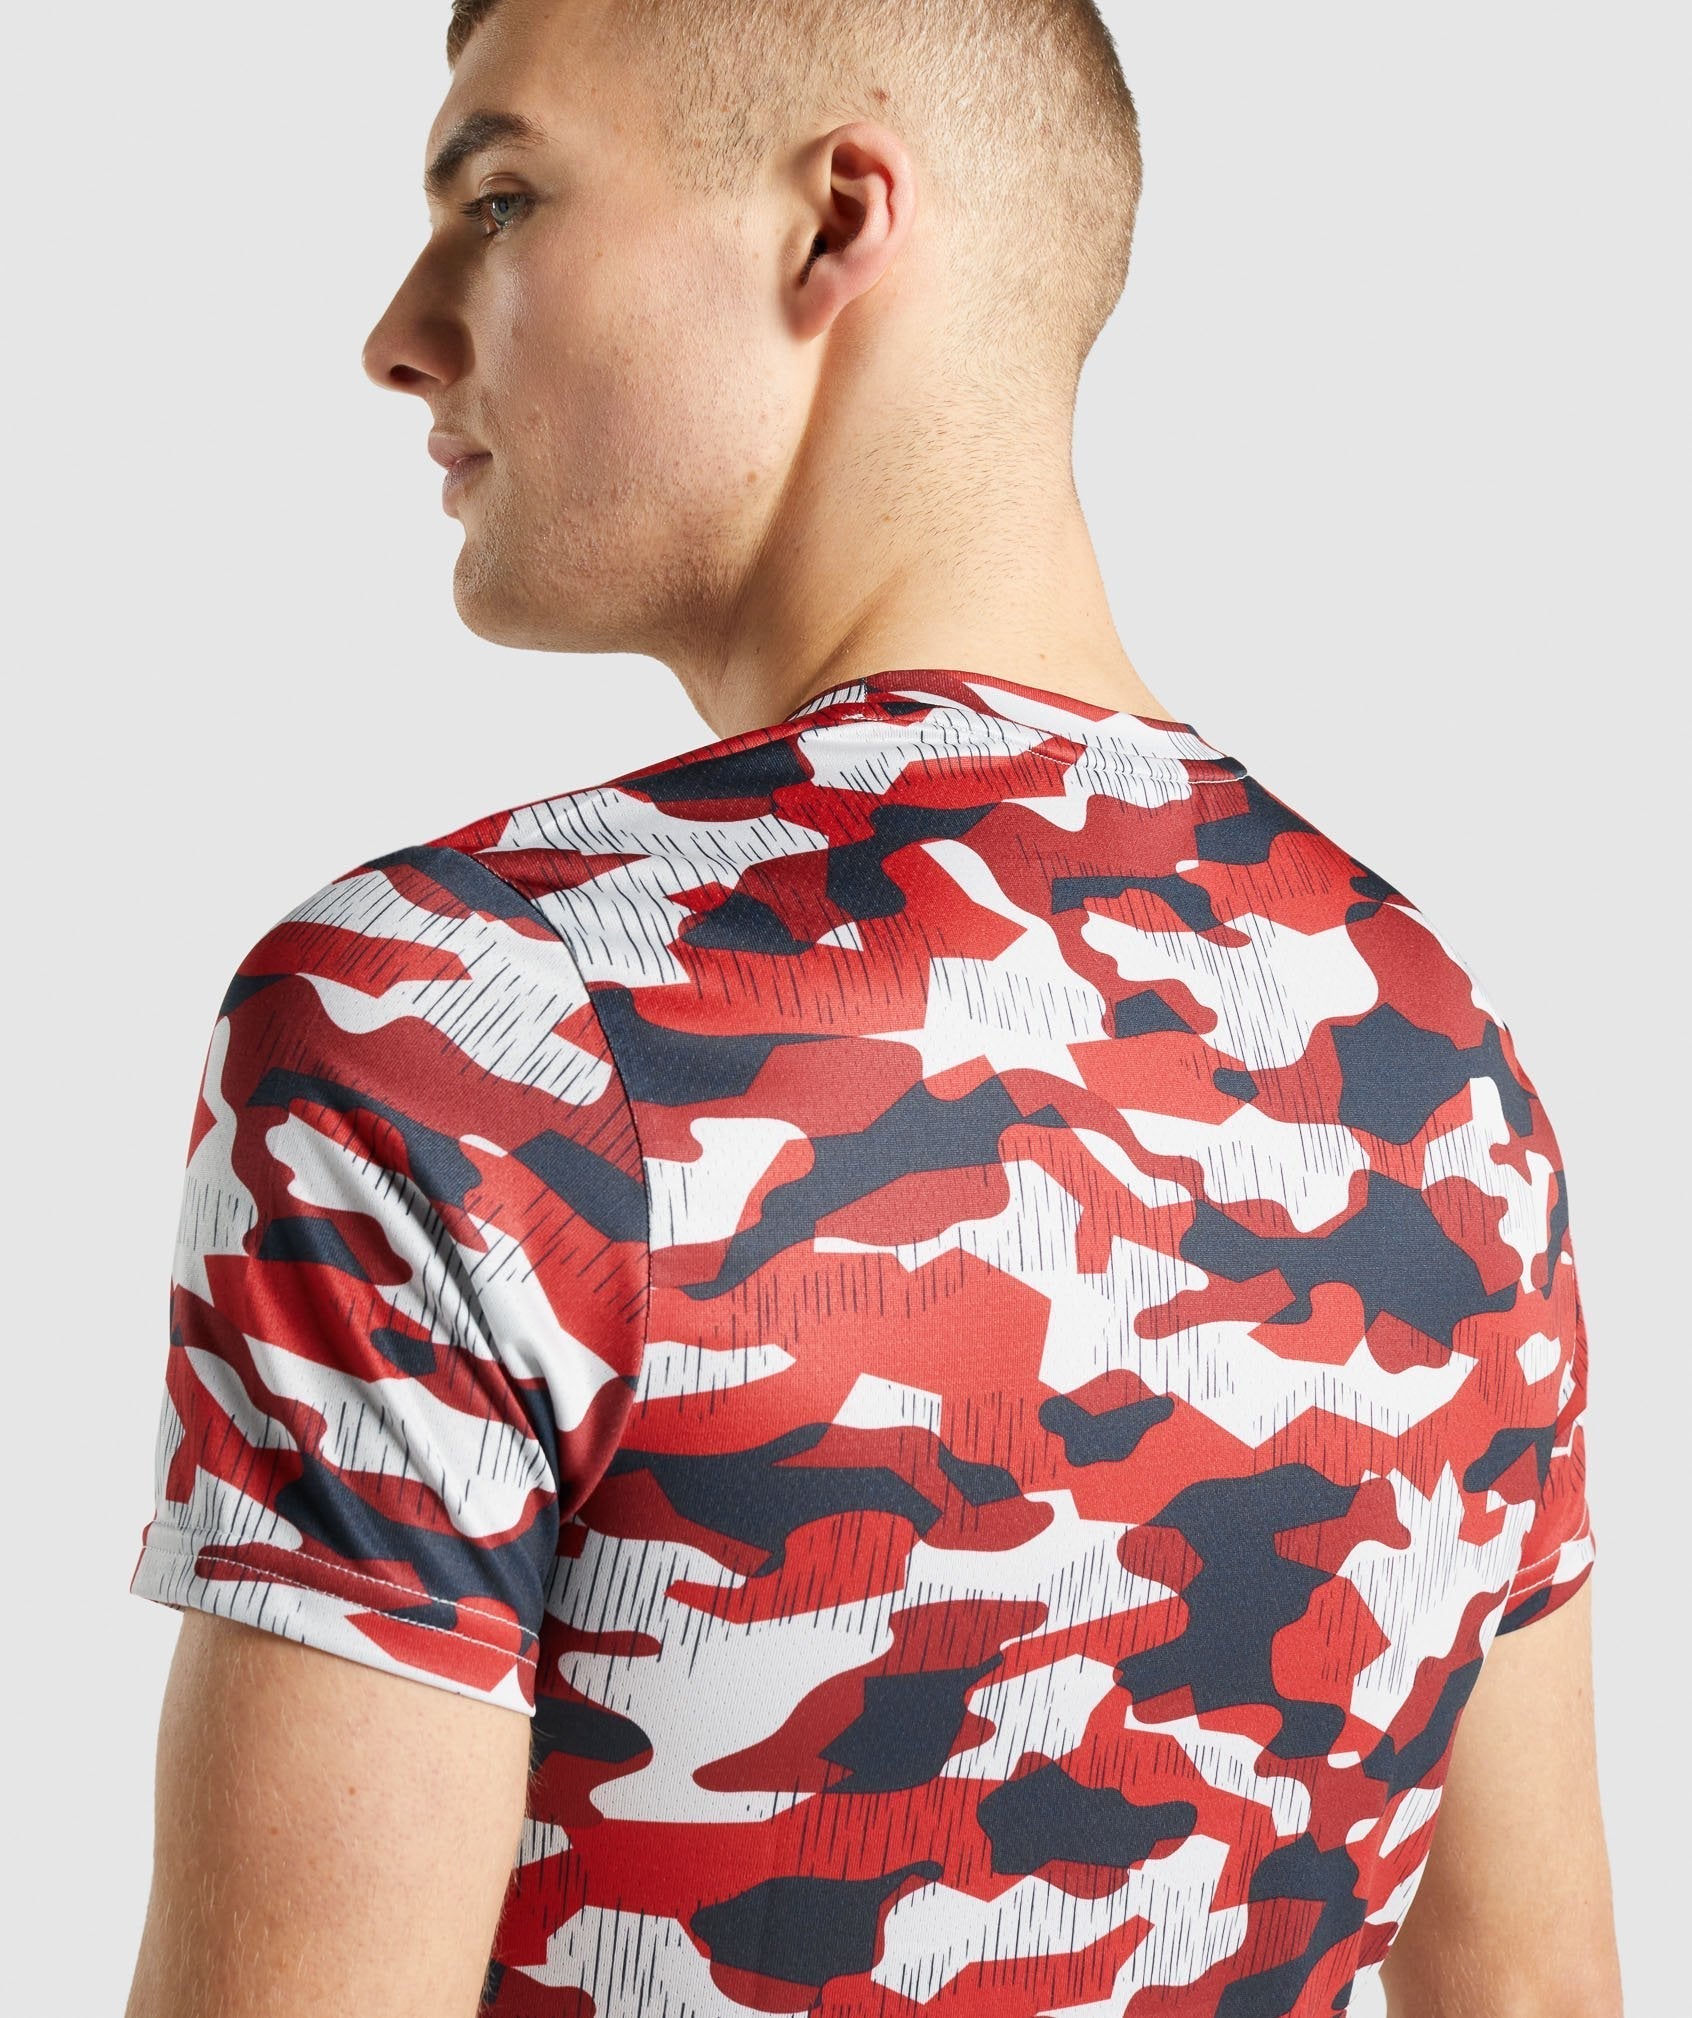 Arrival T-Shirt in Red Print